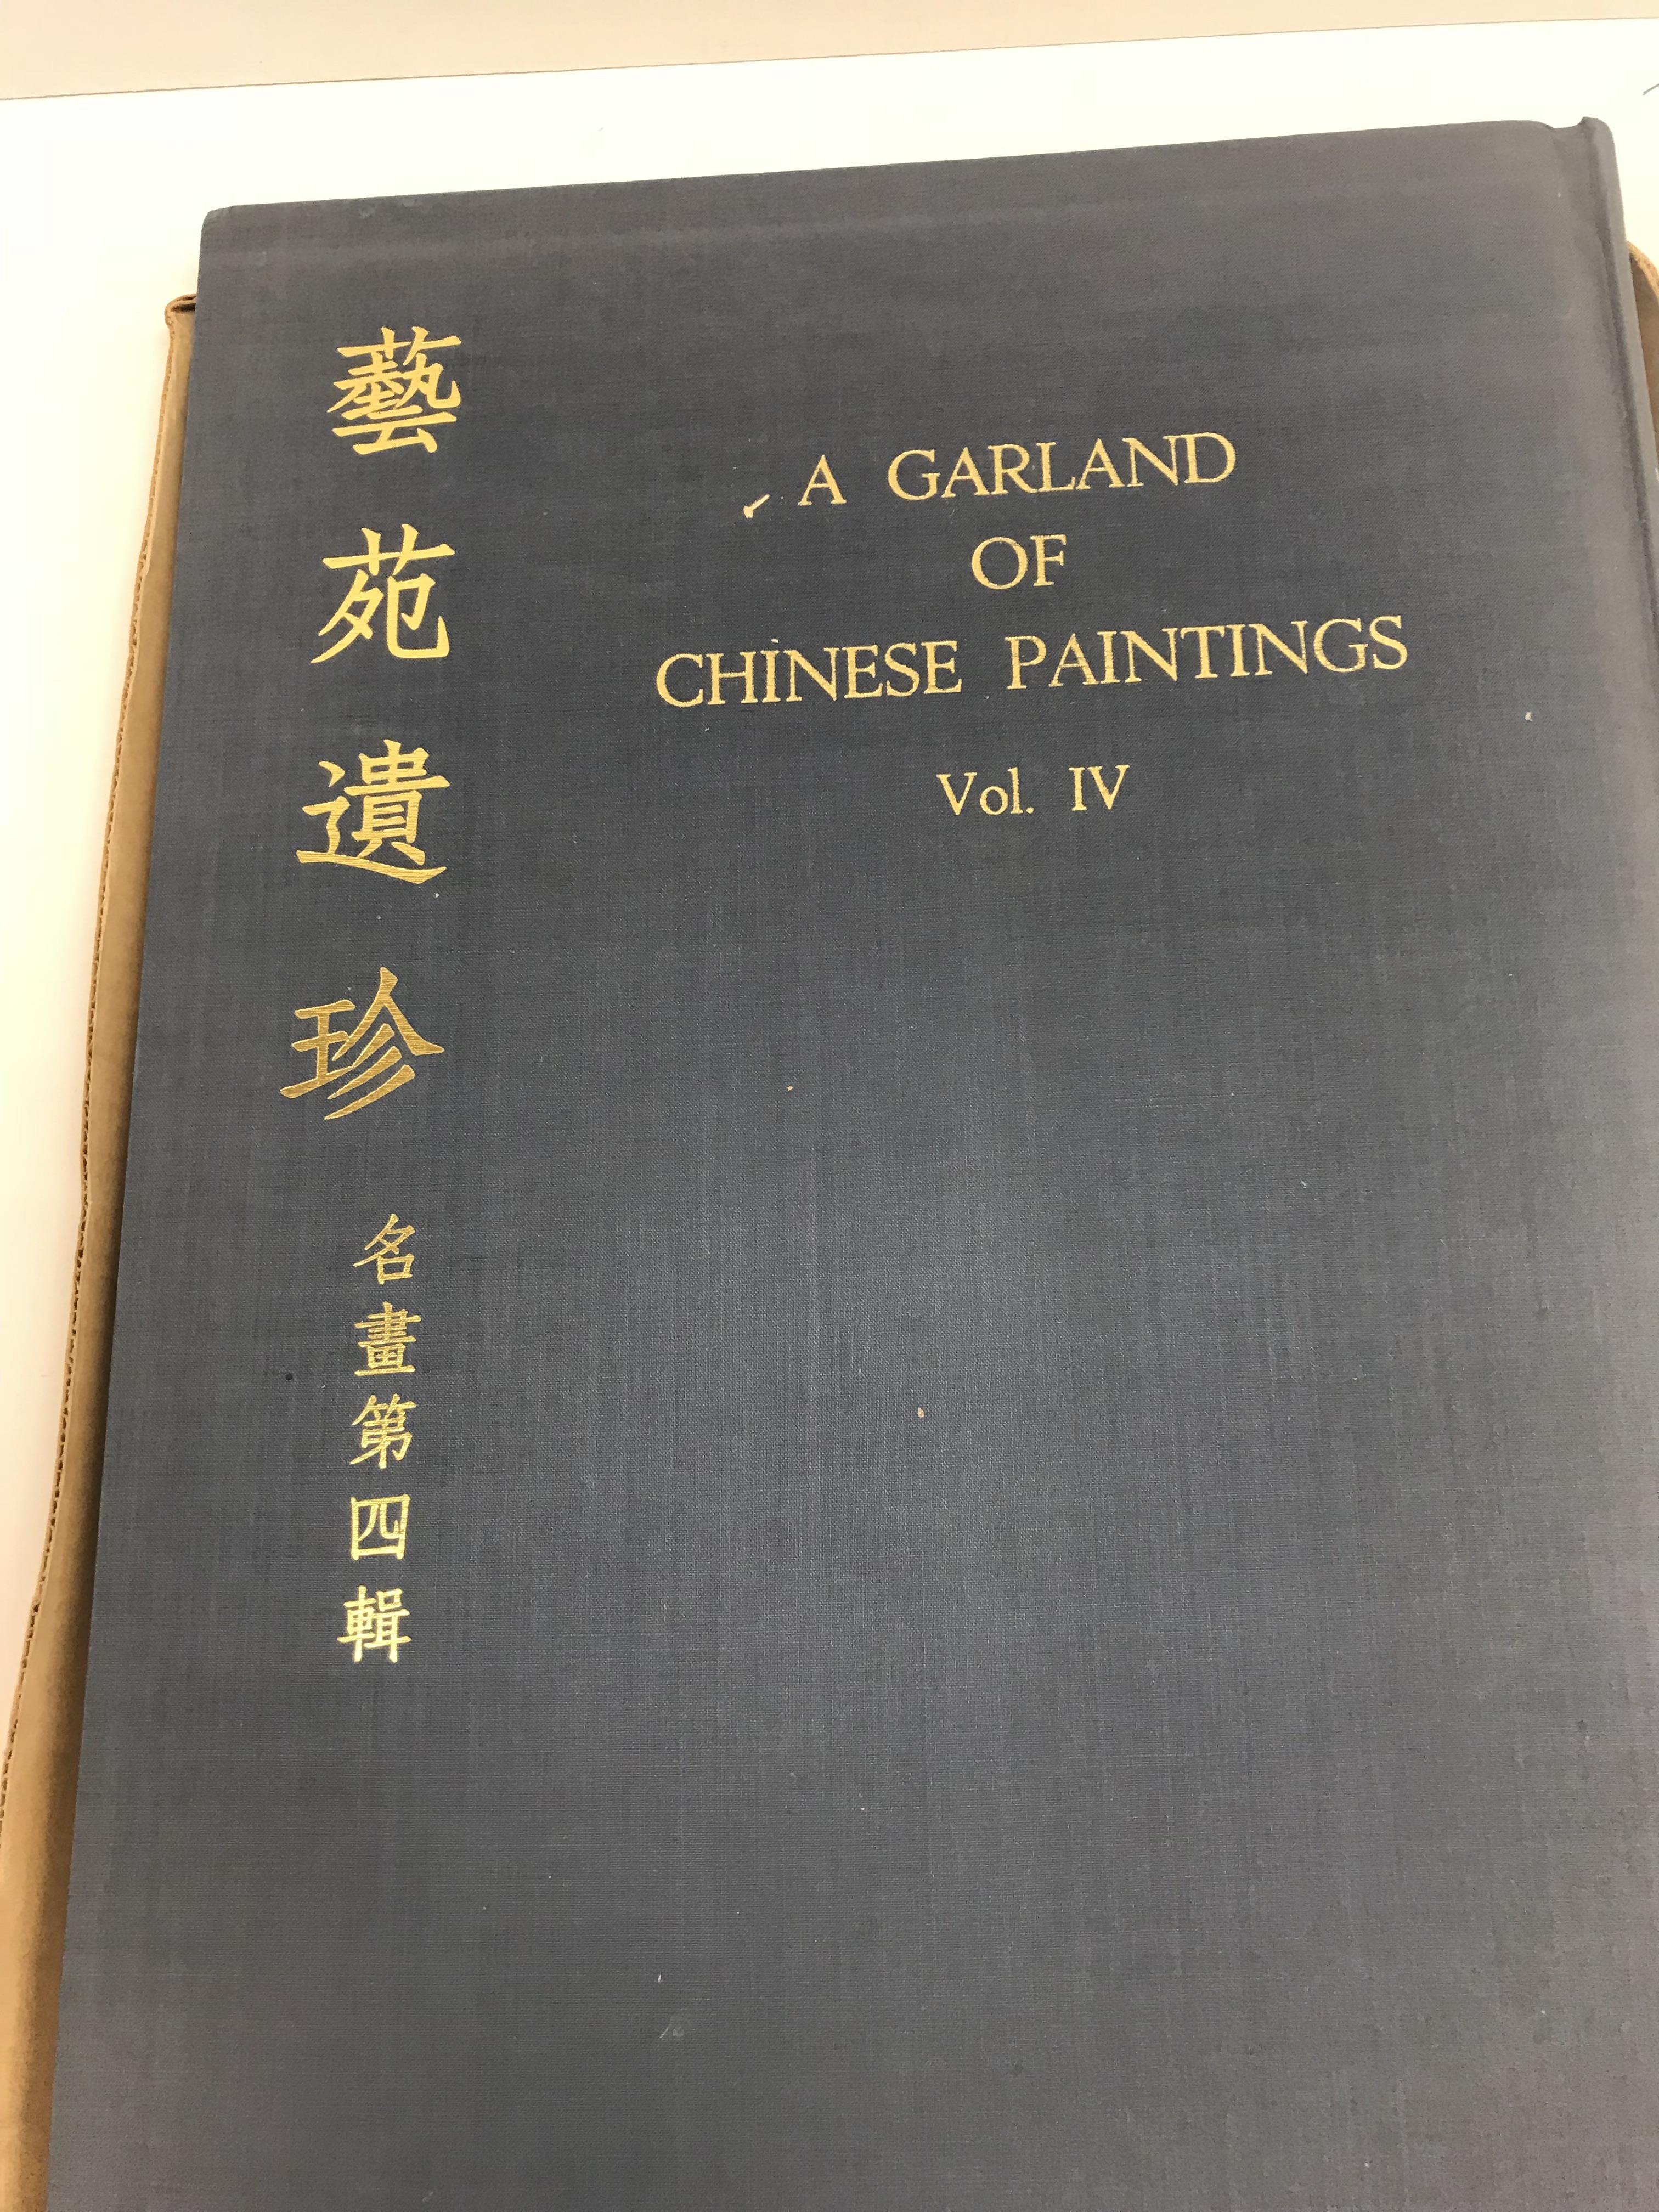 Volume IV “A Garland of Chinese Painting”, tooled and gilded cloth board bound, with cardboard outer - Image 2 of 19